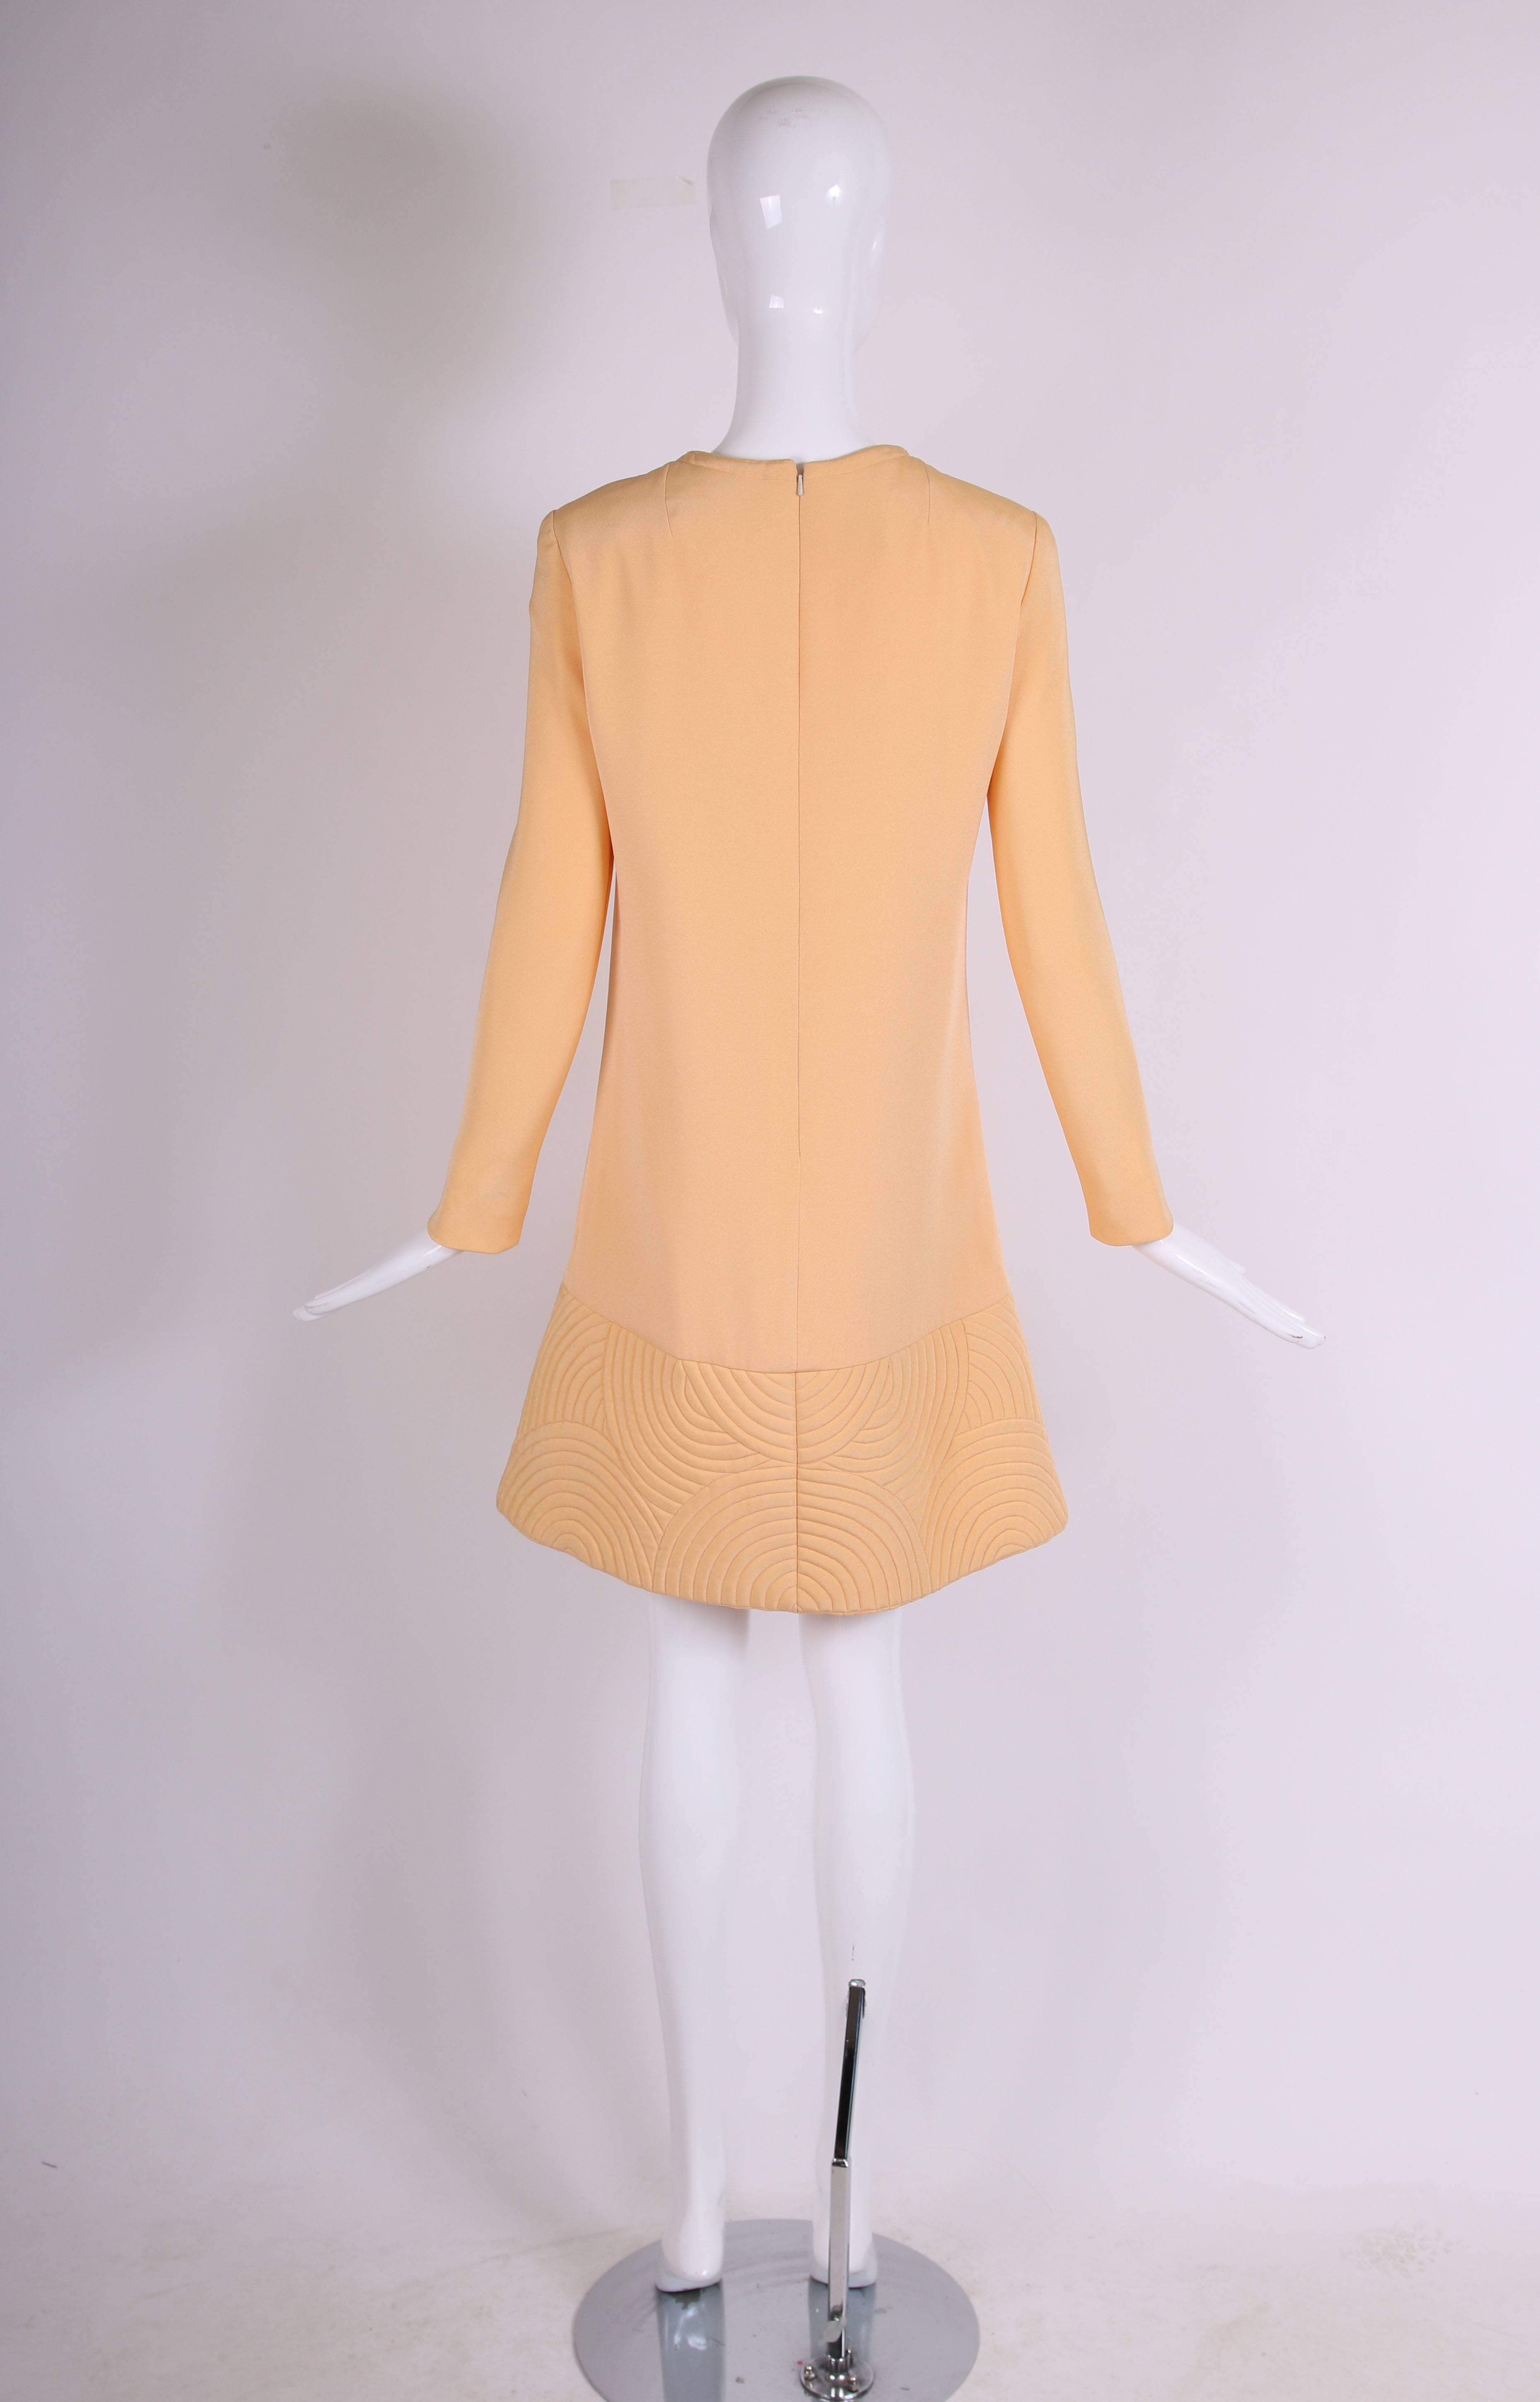 Pierre Cardin Mod Space Age Mini Dress with Geometric Design, 1970s  In Excellent Condition For Sale In Studio City, CA